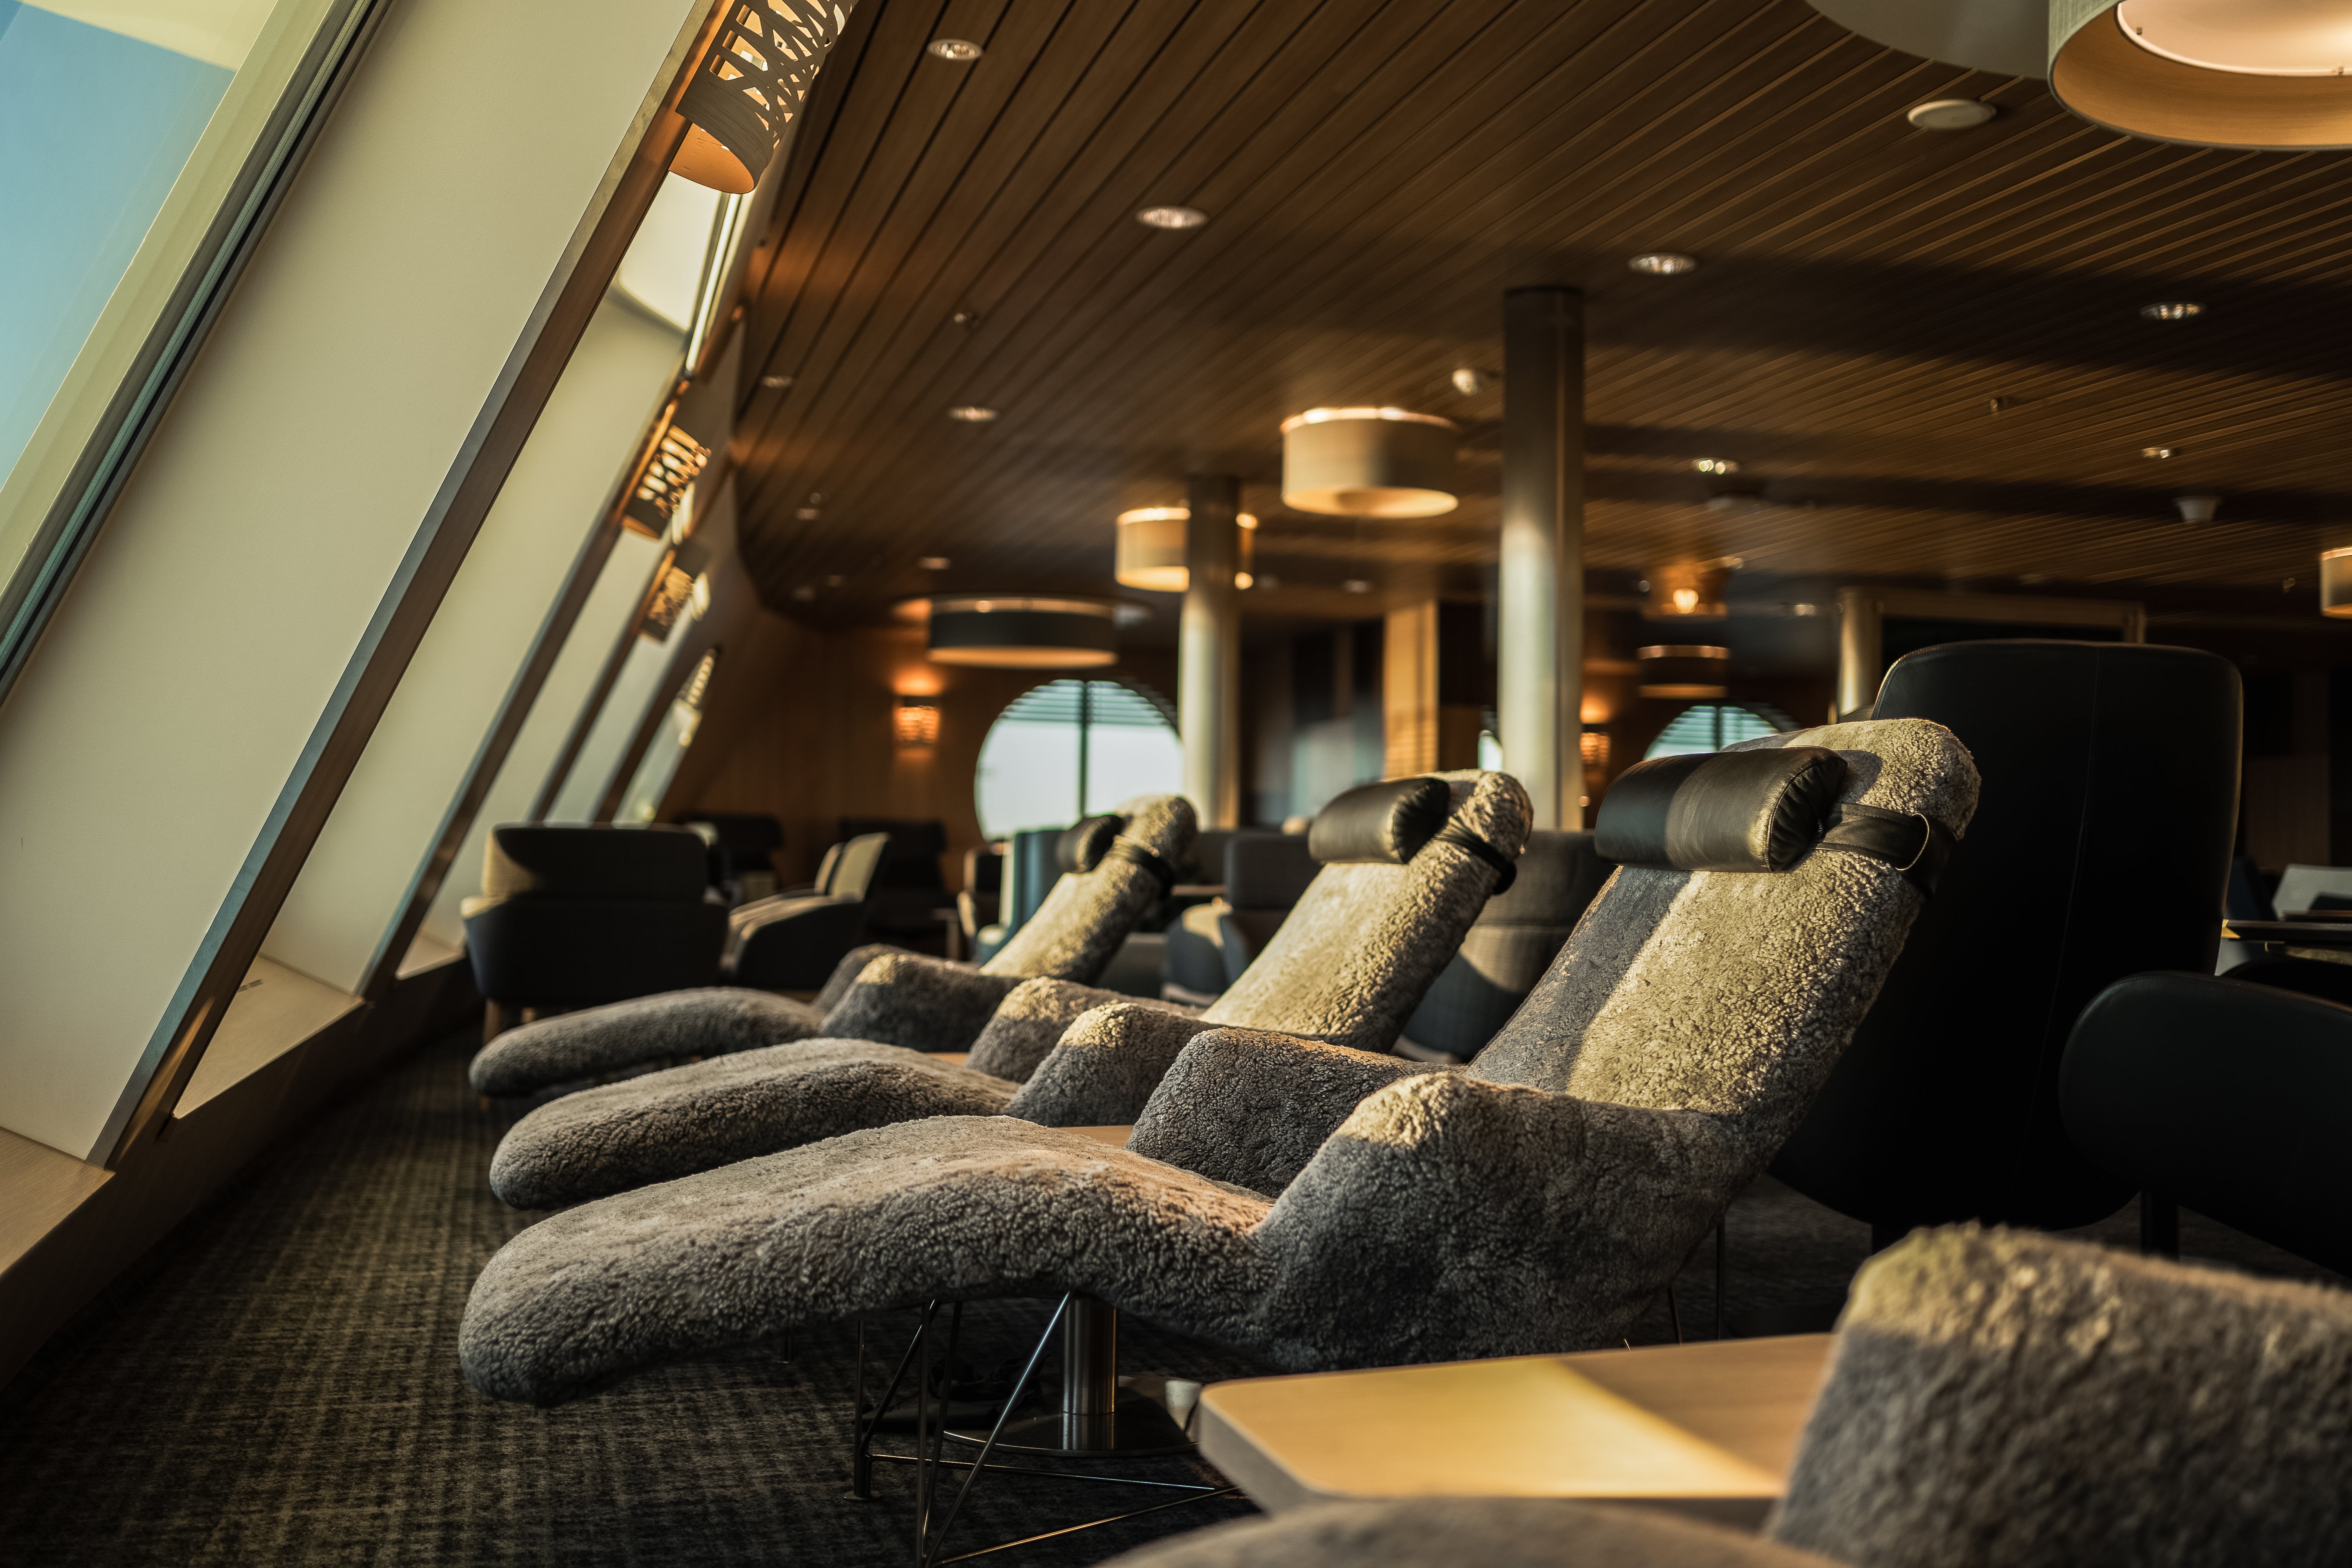 The Stena Plus lounge comes with extra perks